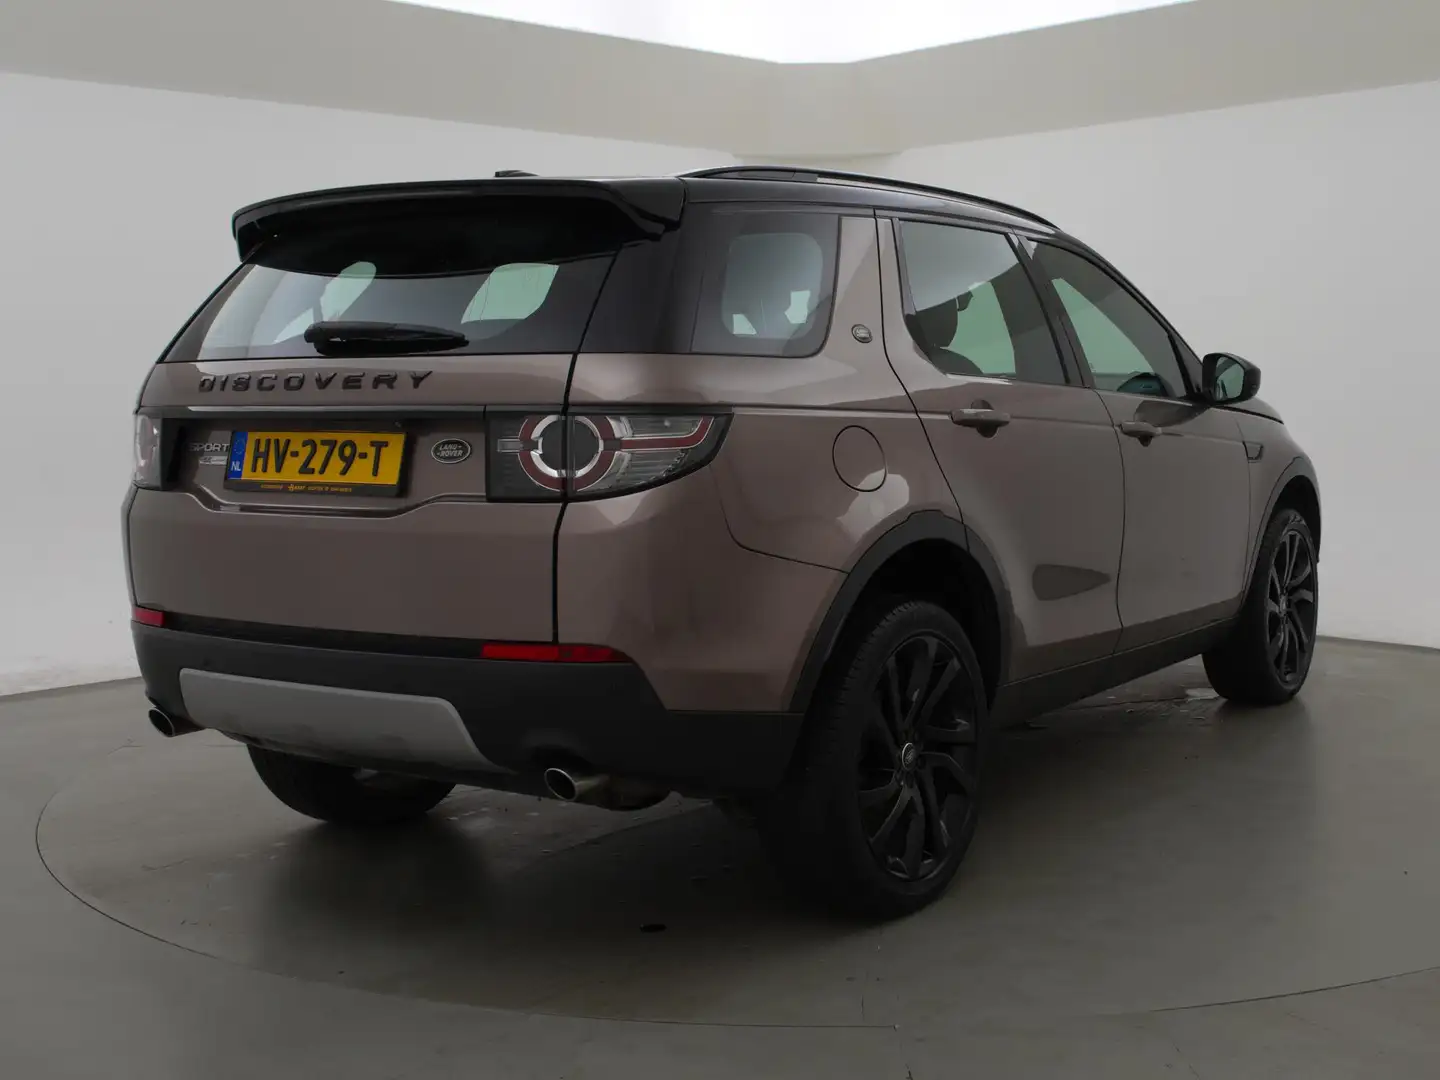 Land Rover Discovery Sport 2.0 Si4 240 PK 4WD AUT9 7-PERSOONS HSE LUXURY Bruin - 2